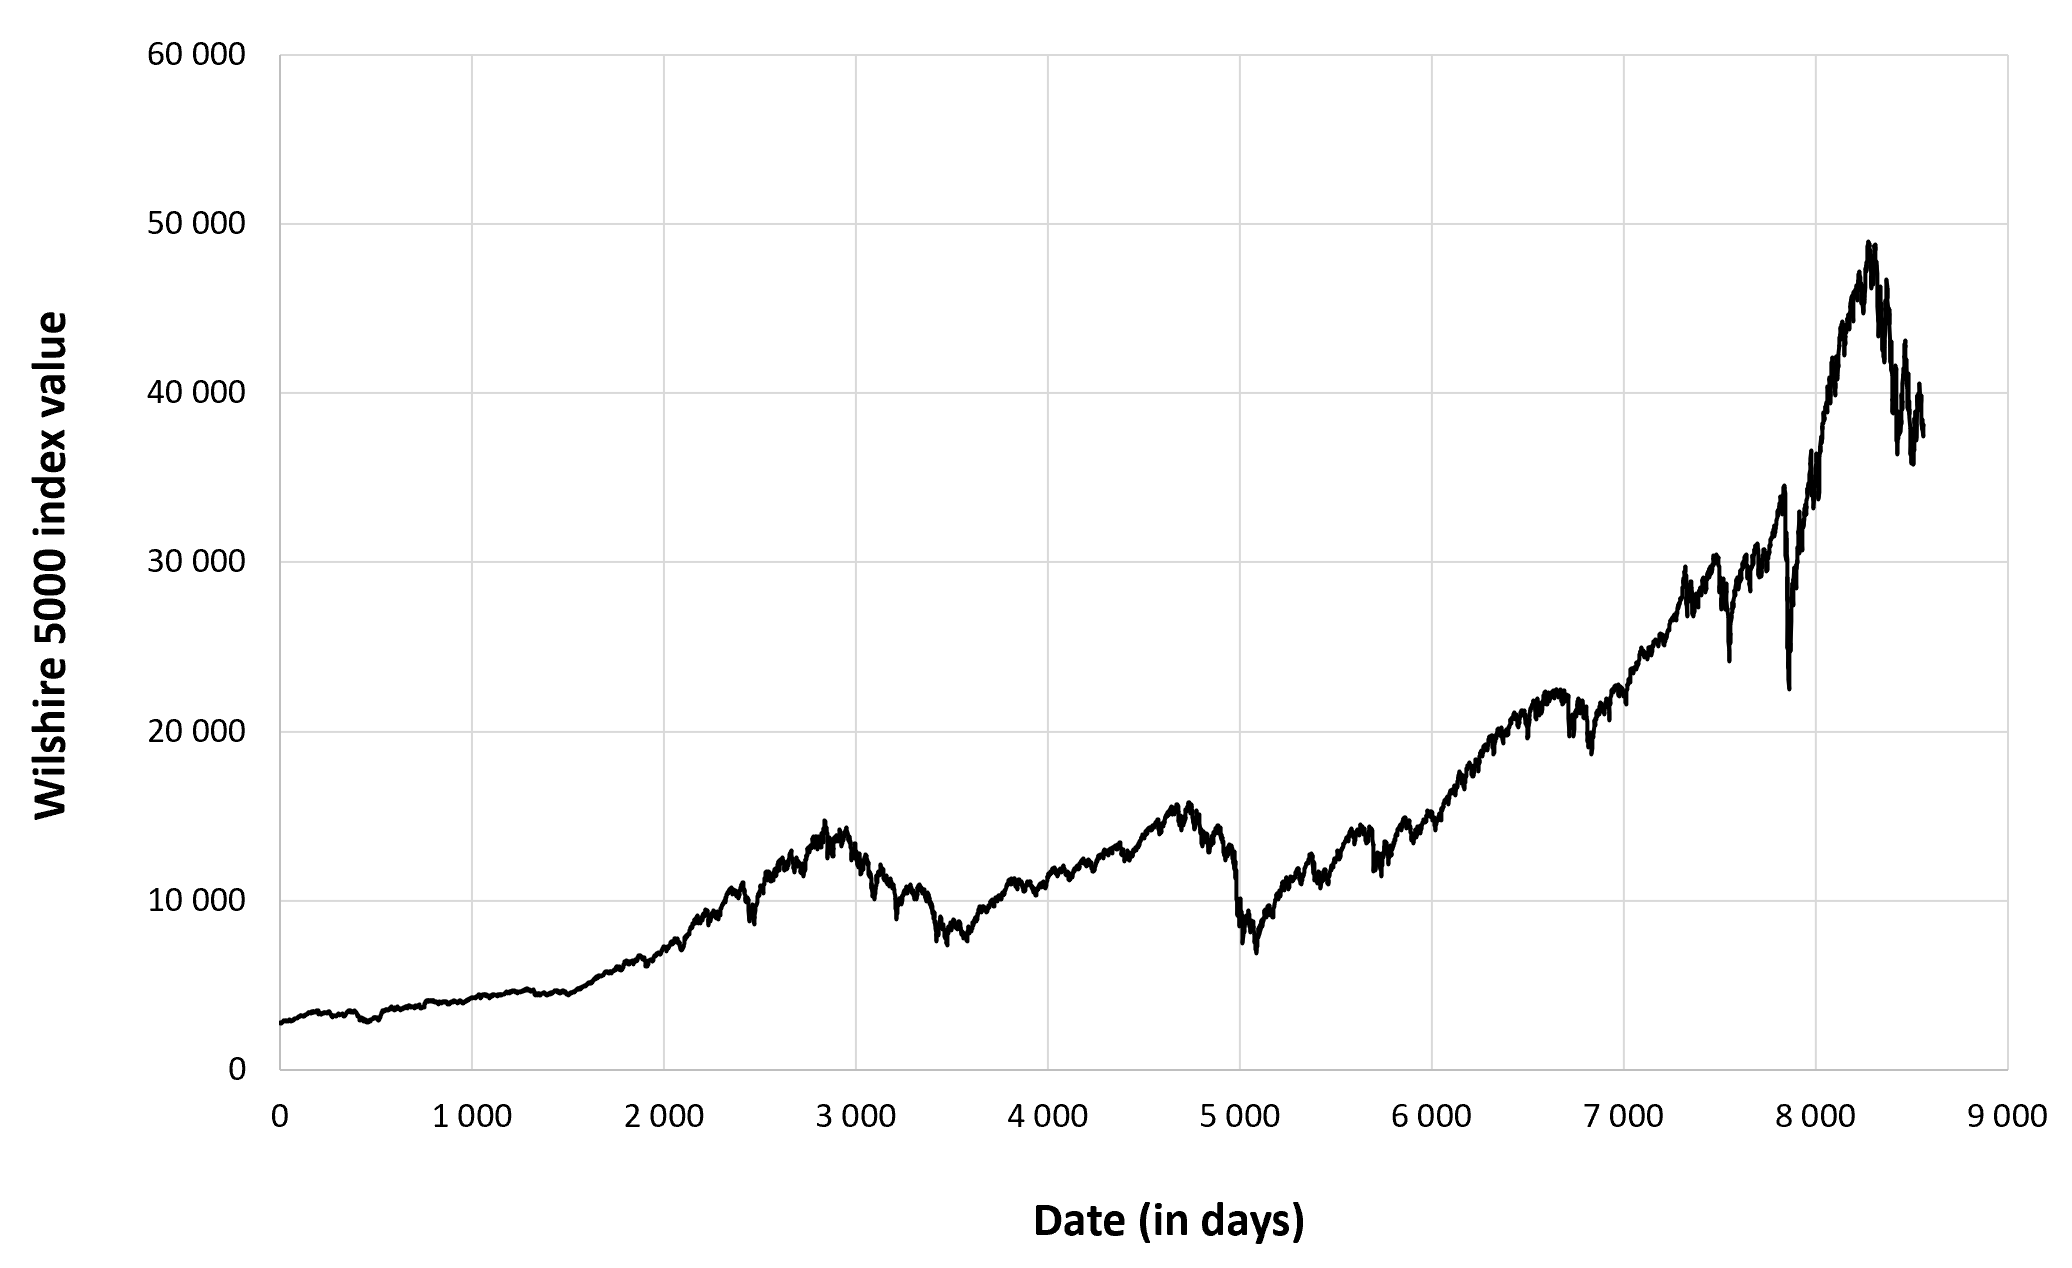 Evolution of the Wilshire 5000 index